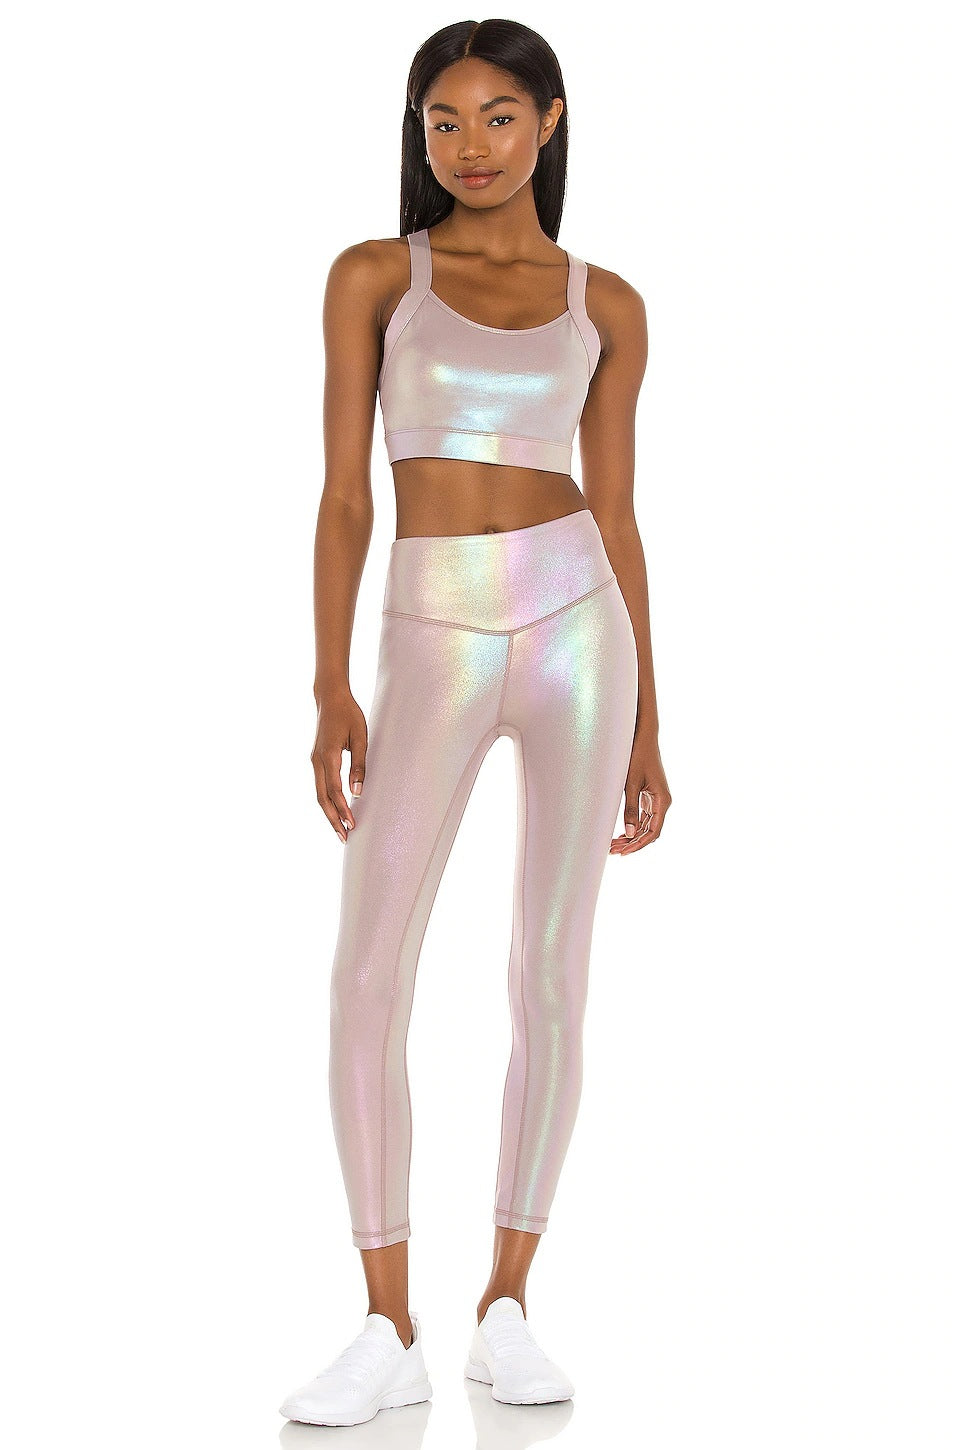 2023 Fashion Trends Gym Outfits | Holographic Gym Aesthetic Outfit 2-piece Set